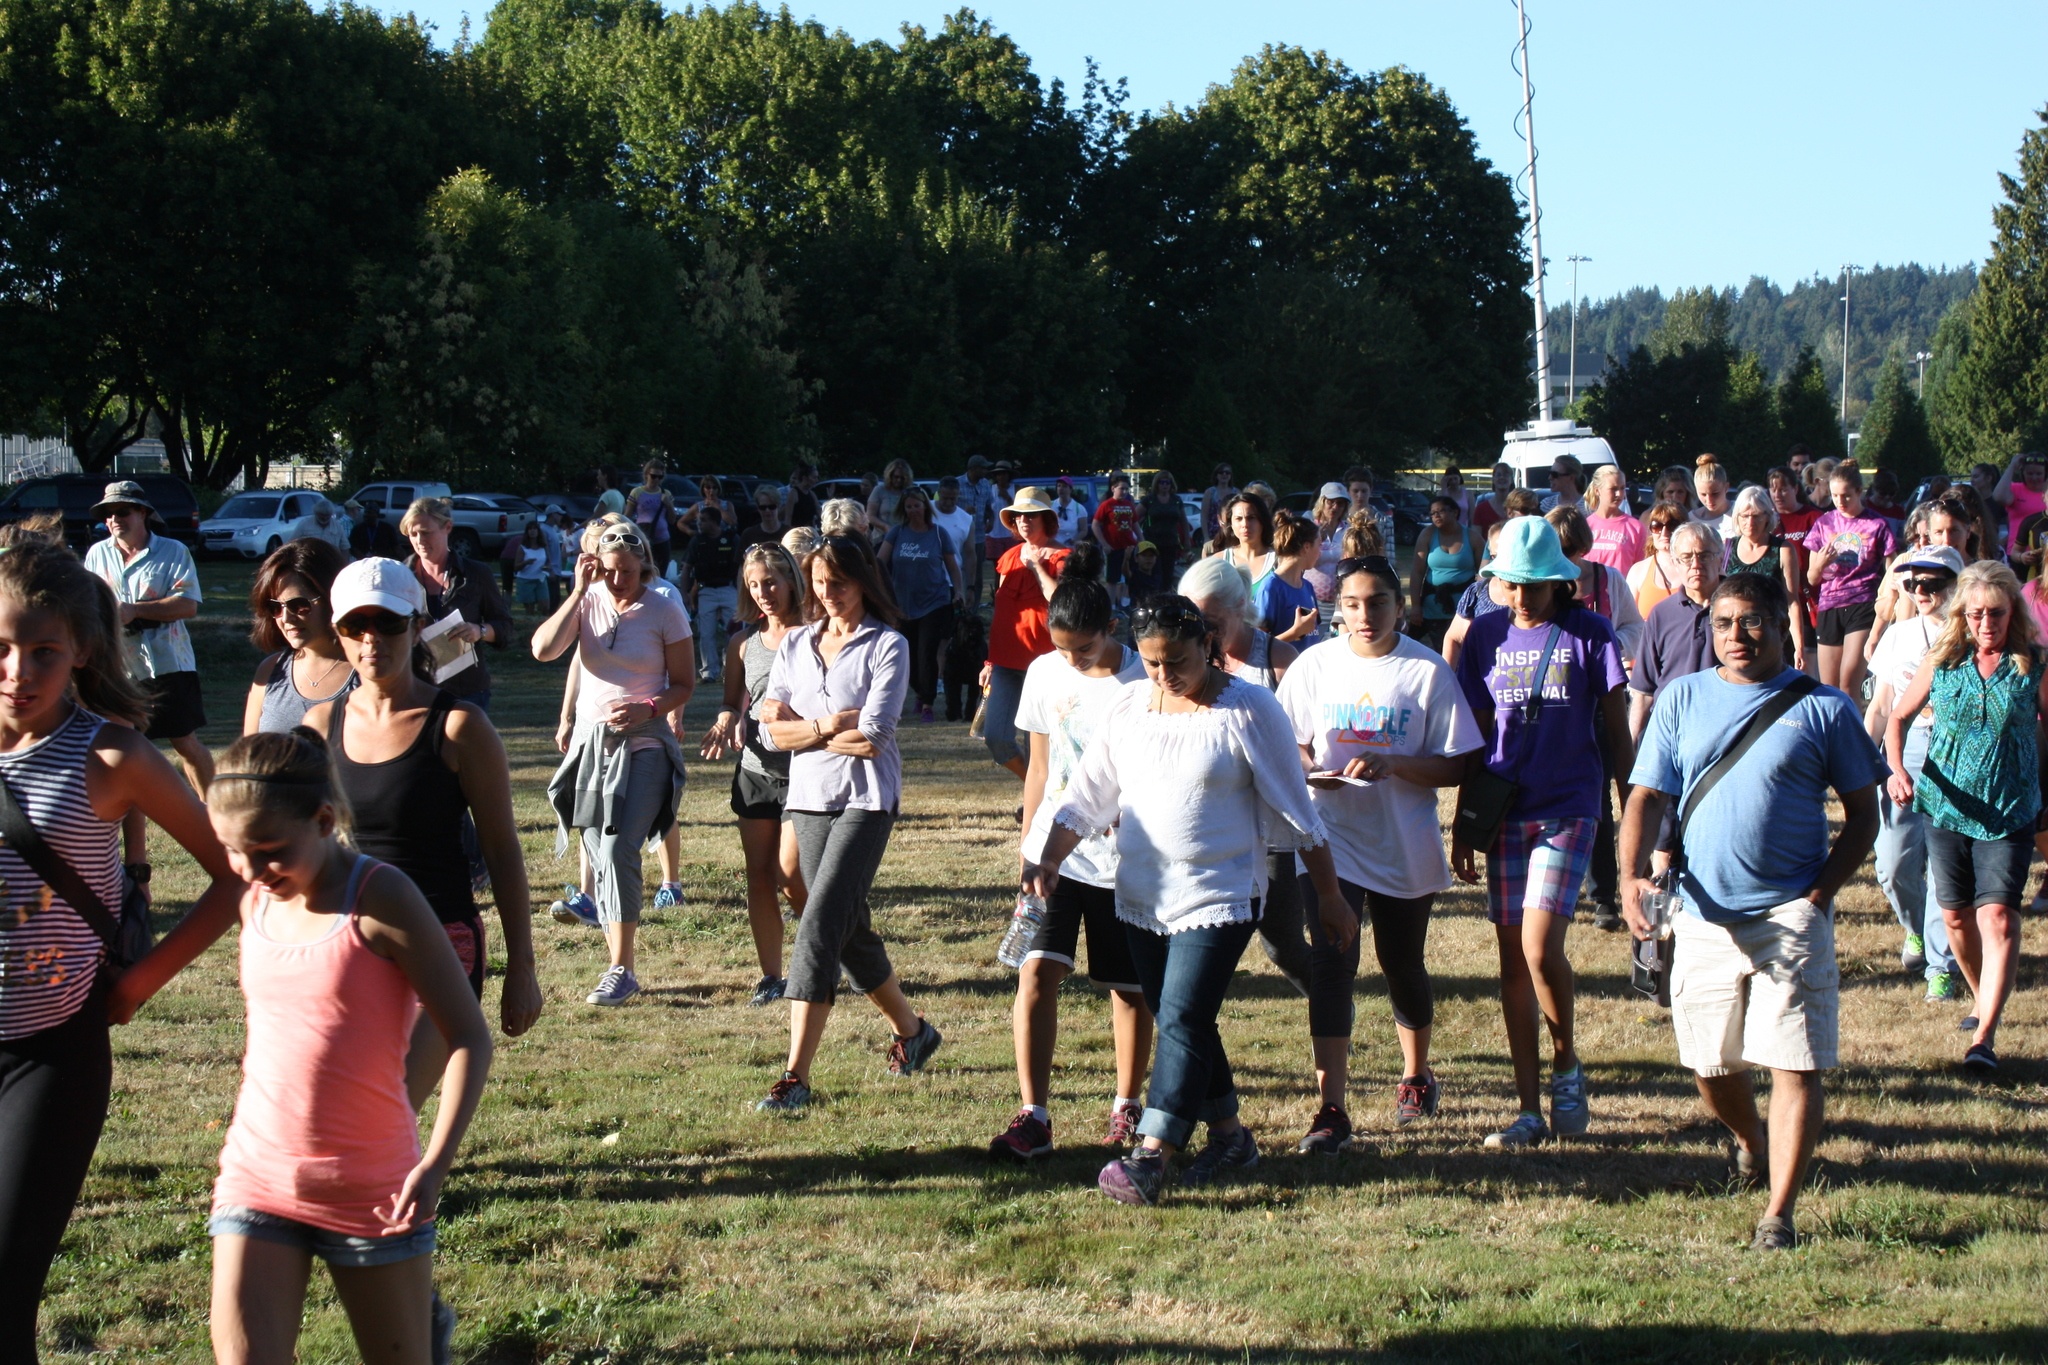 Redmond-area residents Walk for Safety at Marymoor Park to celebrate an assault survivor who was recently attacked along the park’s trail. Samantha Pak